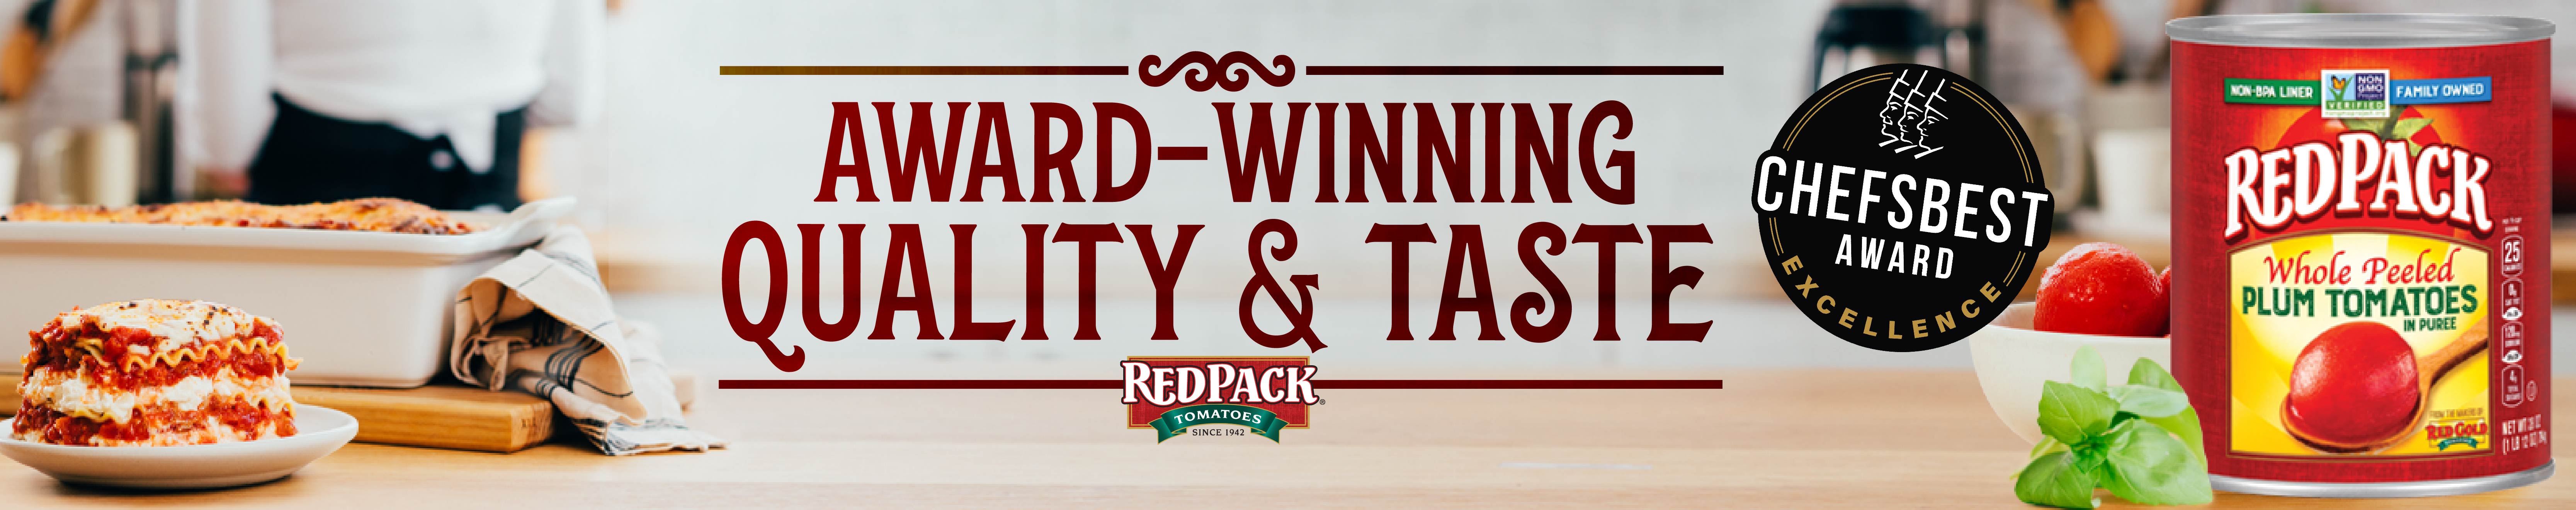 Award-Winning Quality & Tastes from Redpack Tomatoes